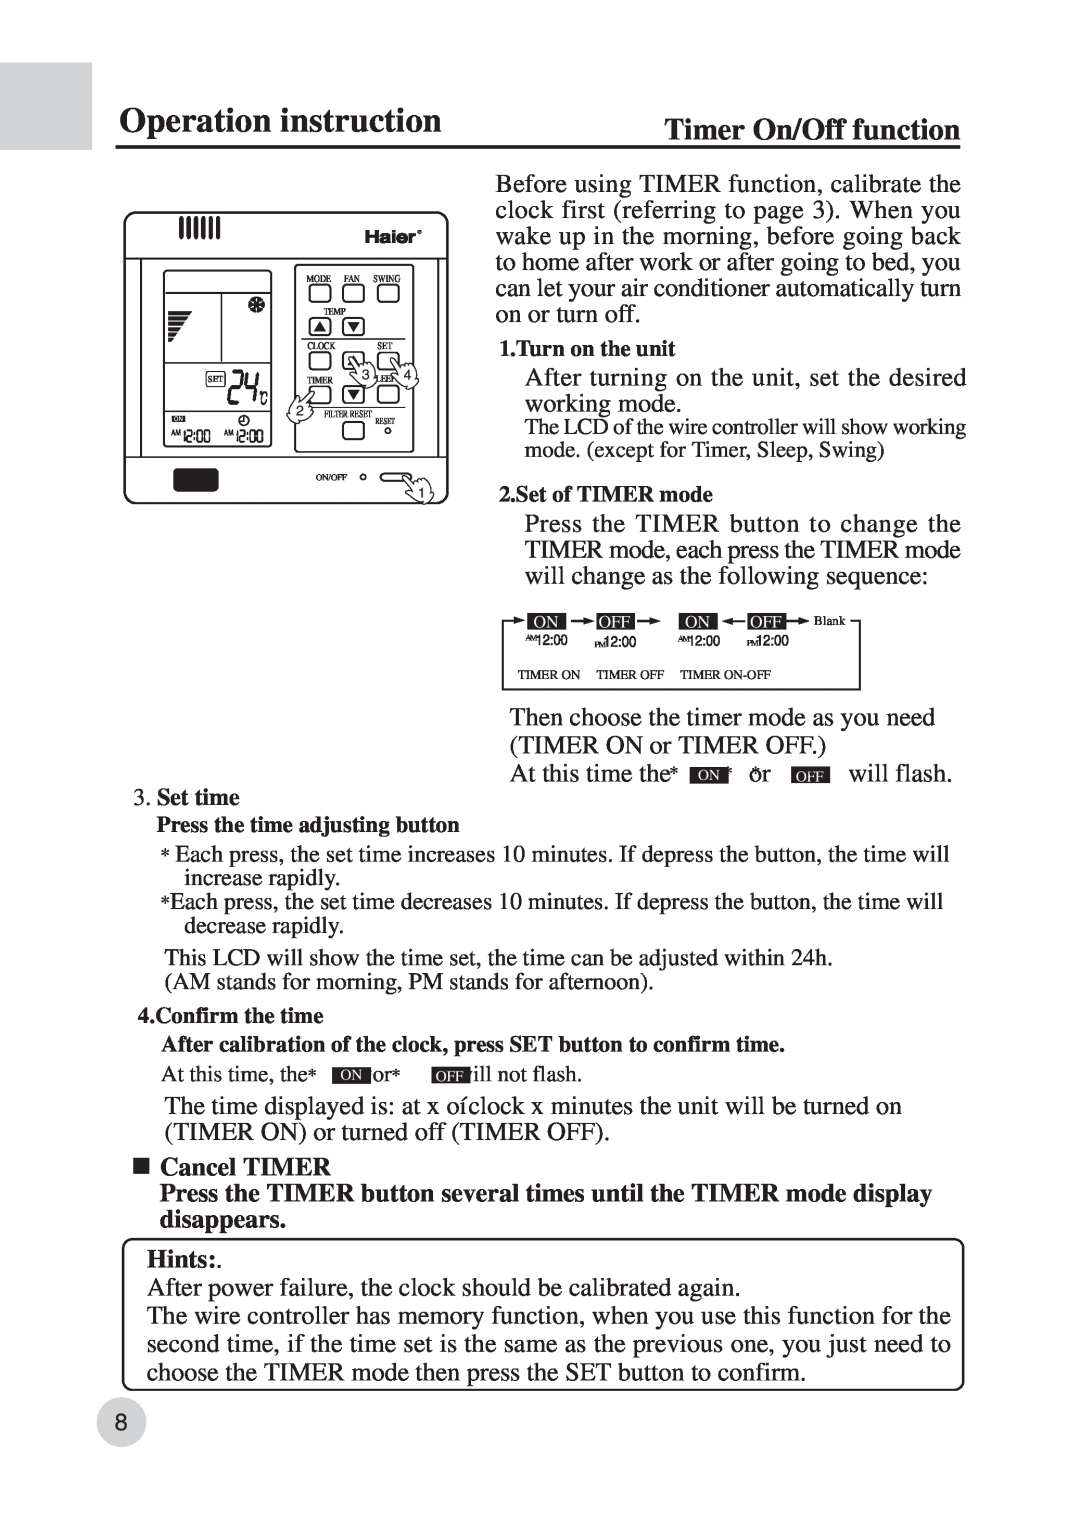 Haier AD422BMBAA manual Timer On/Off function, Cancel TIMER, disappears Hints, Operation instruction 